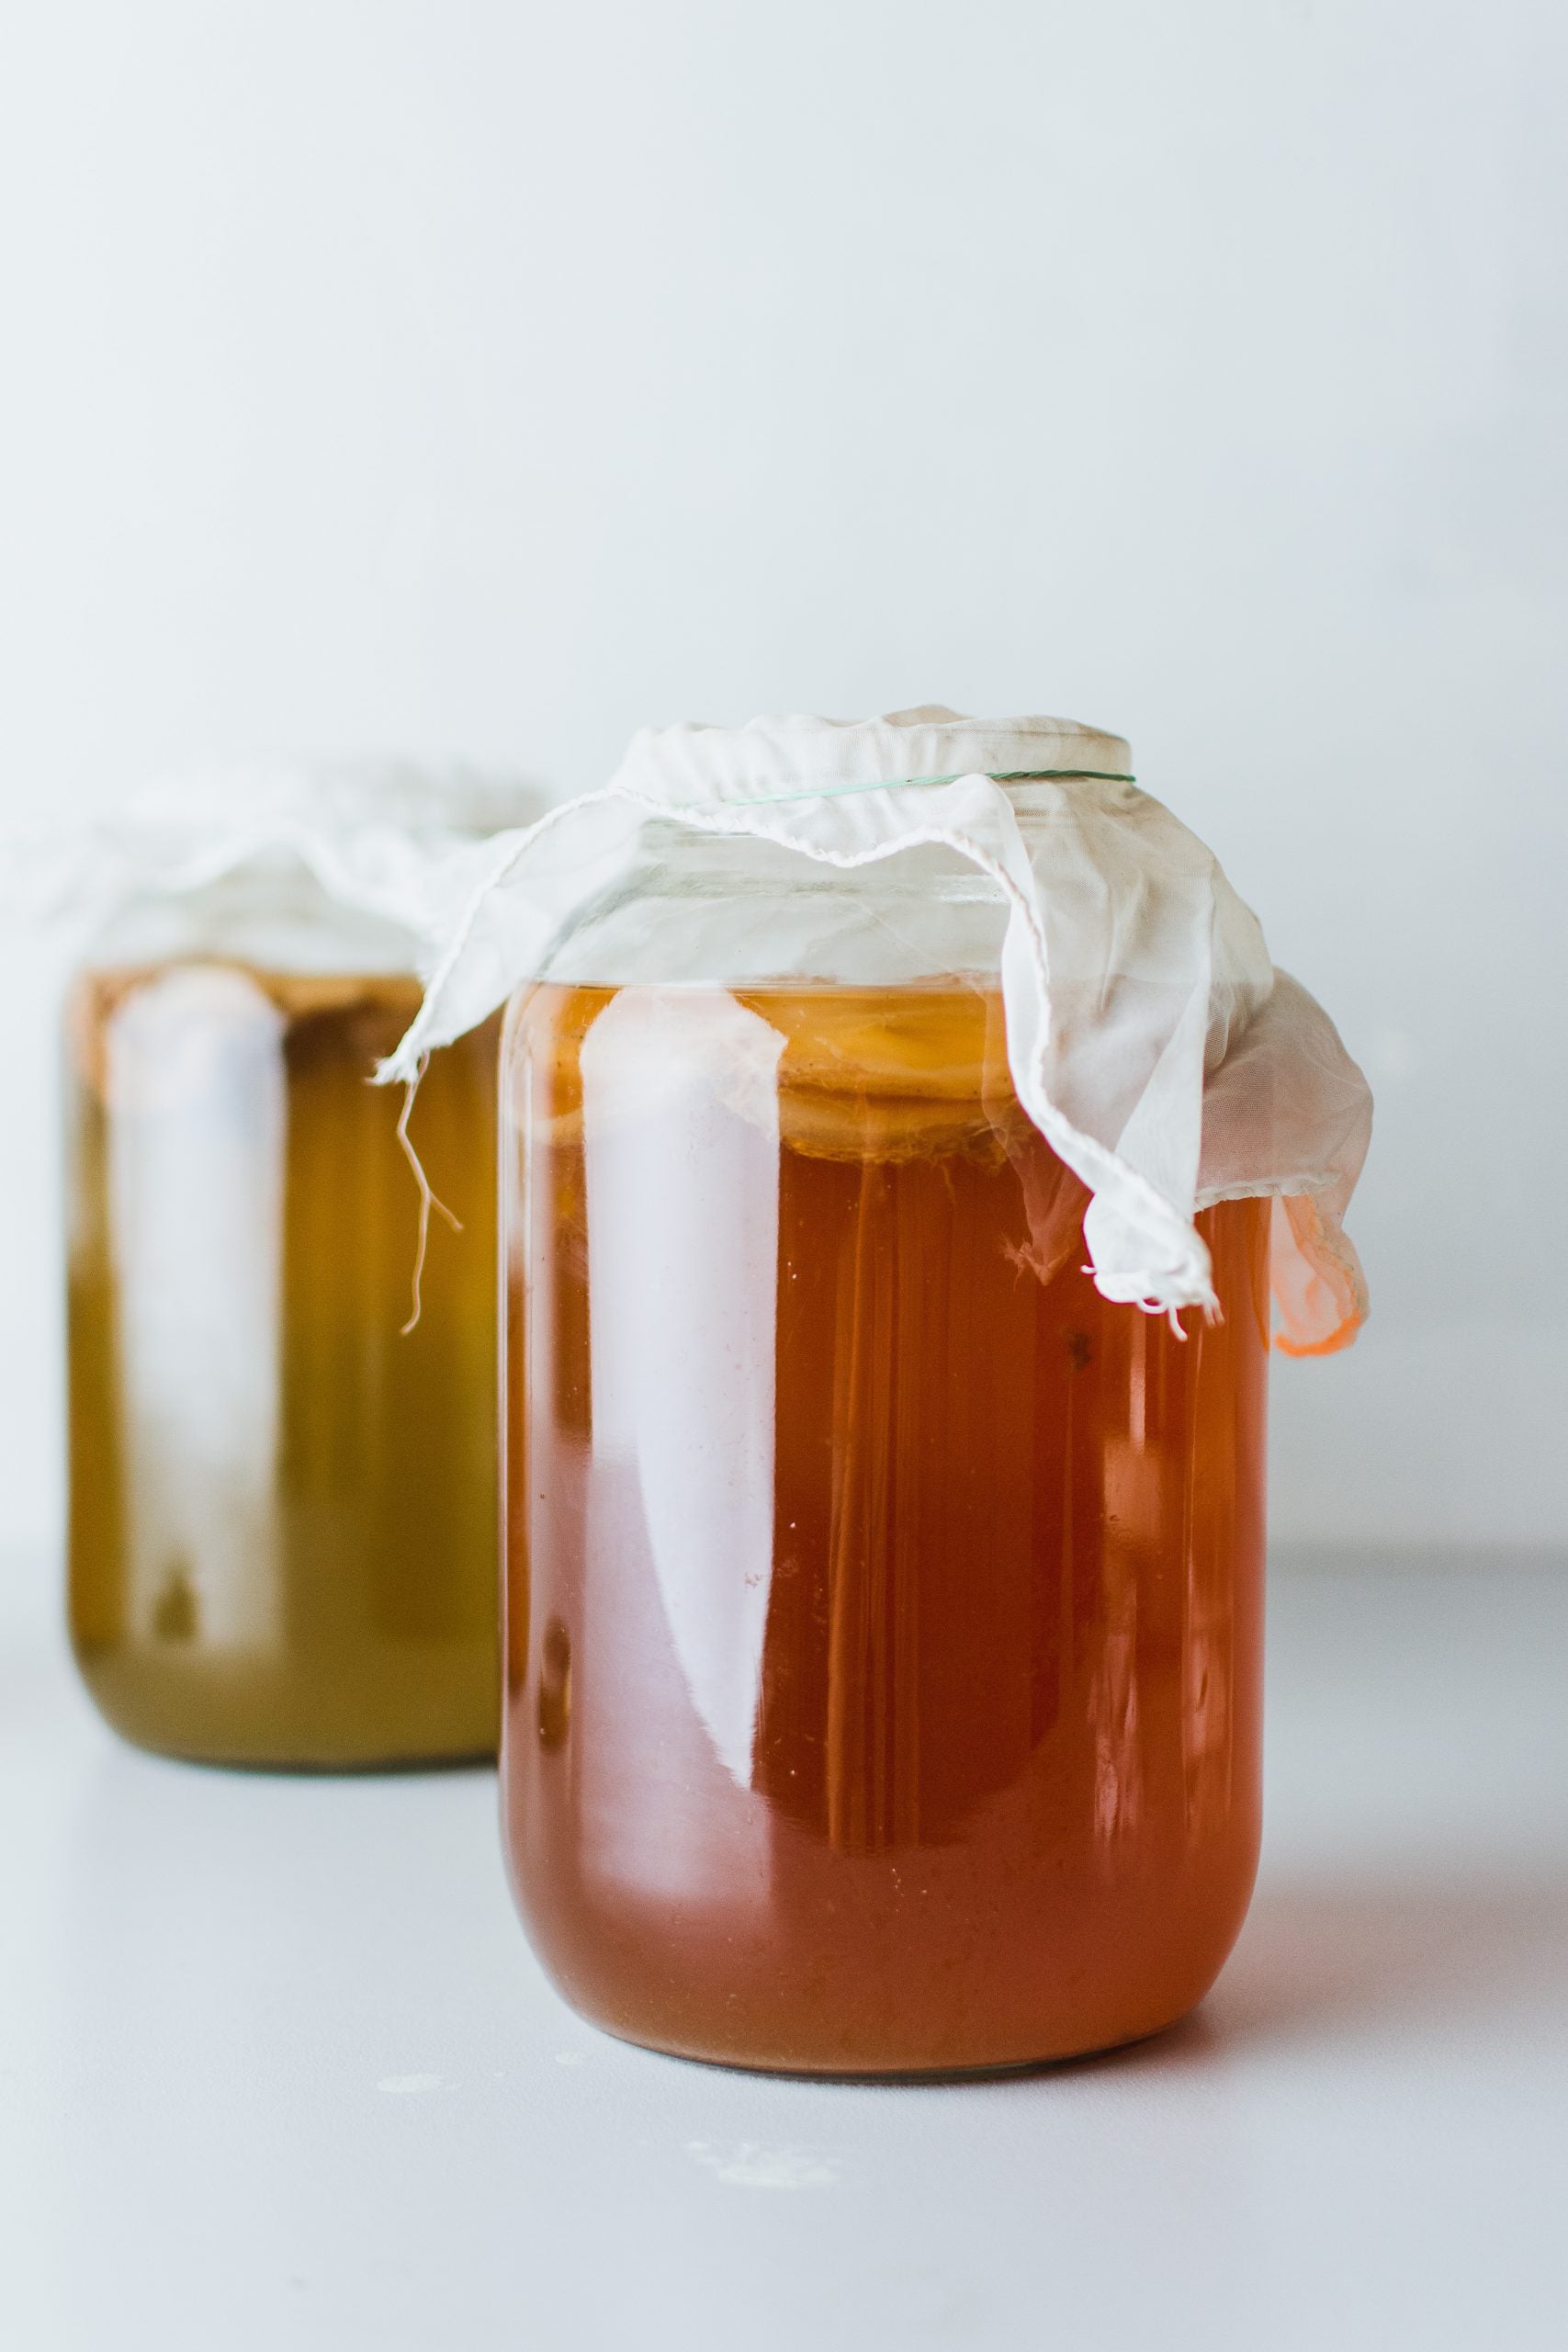 Our Best Tips for Brewing Kombucha at Home